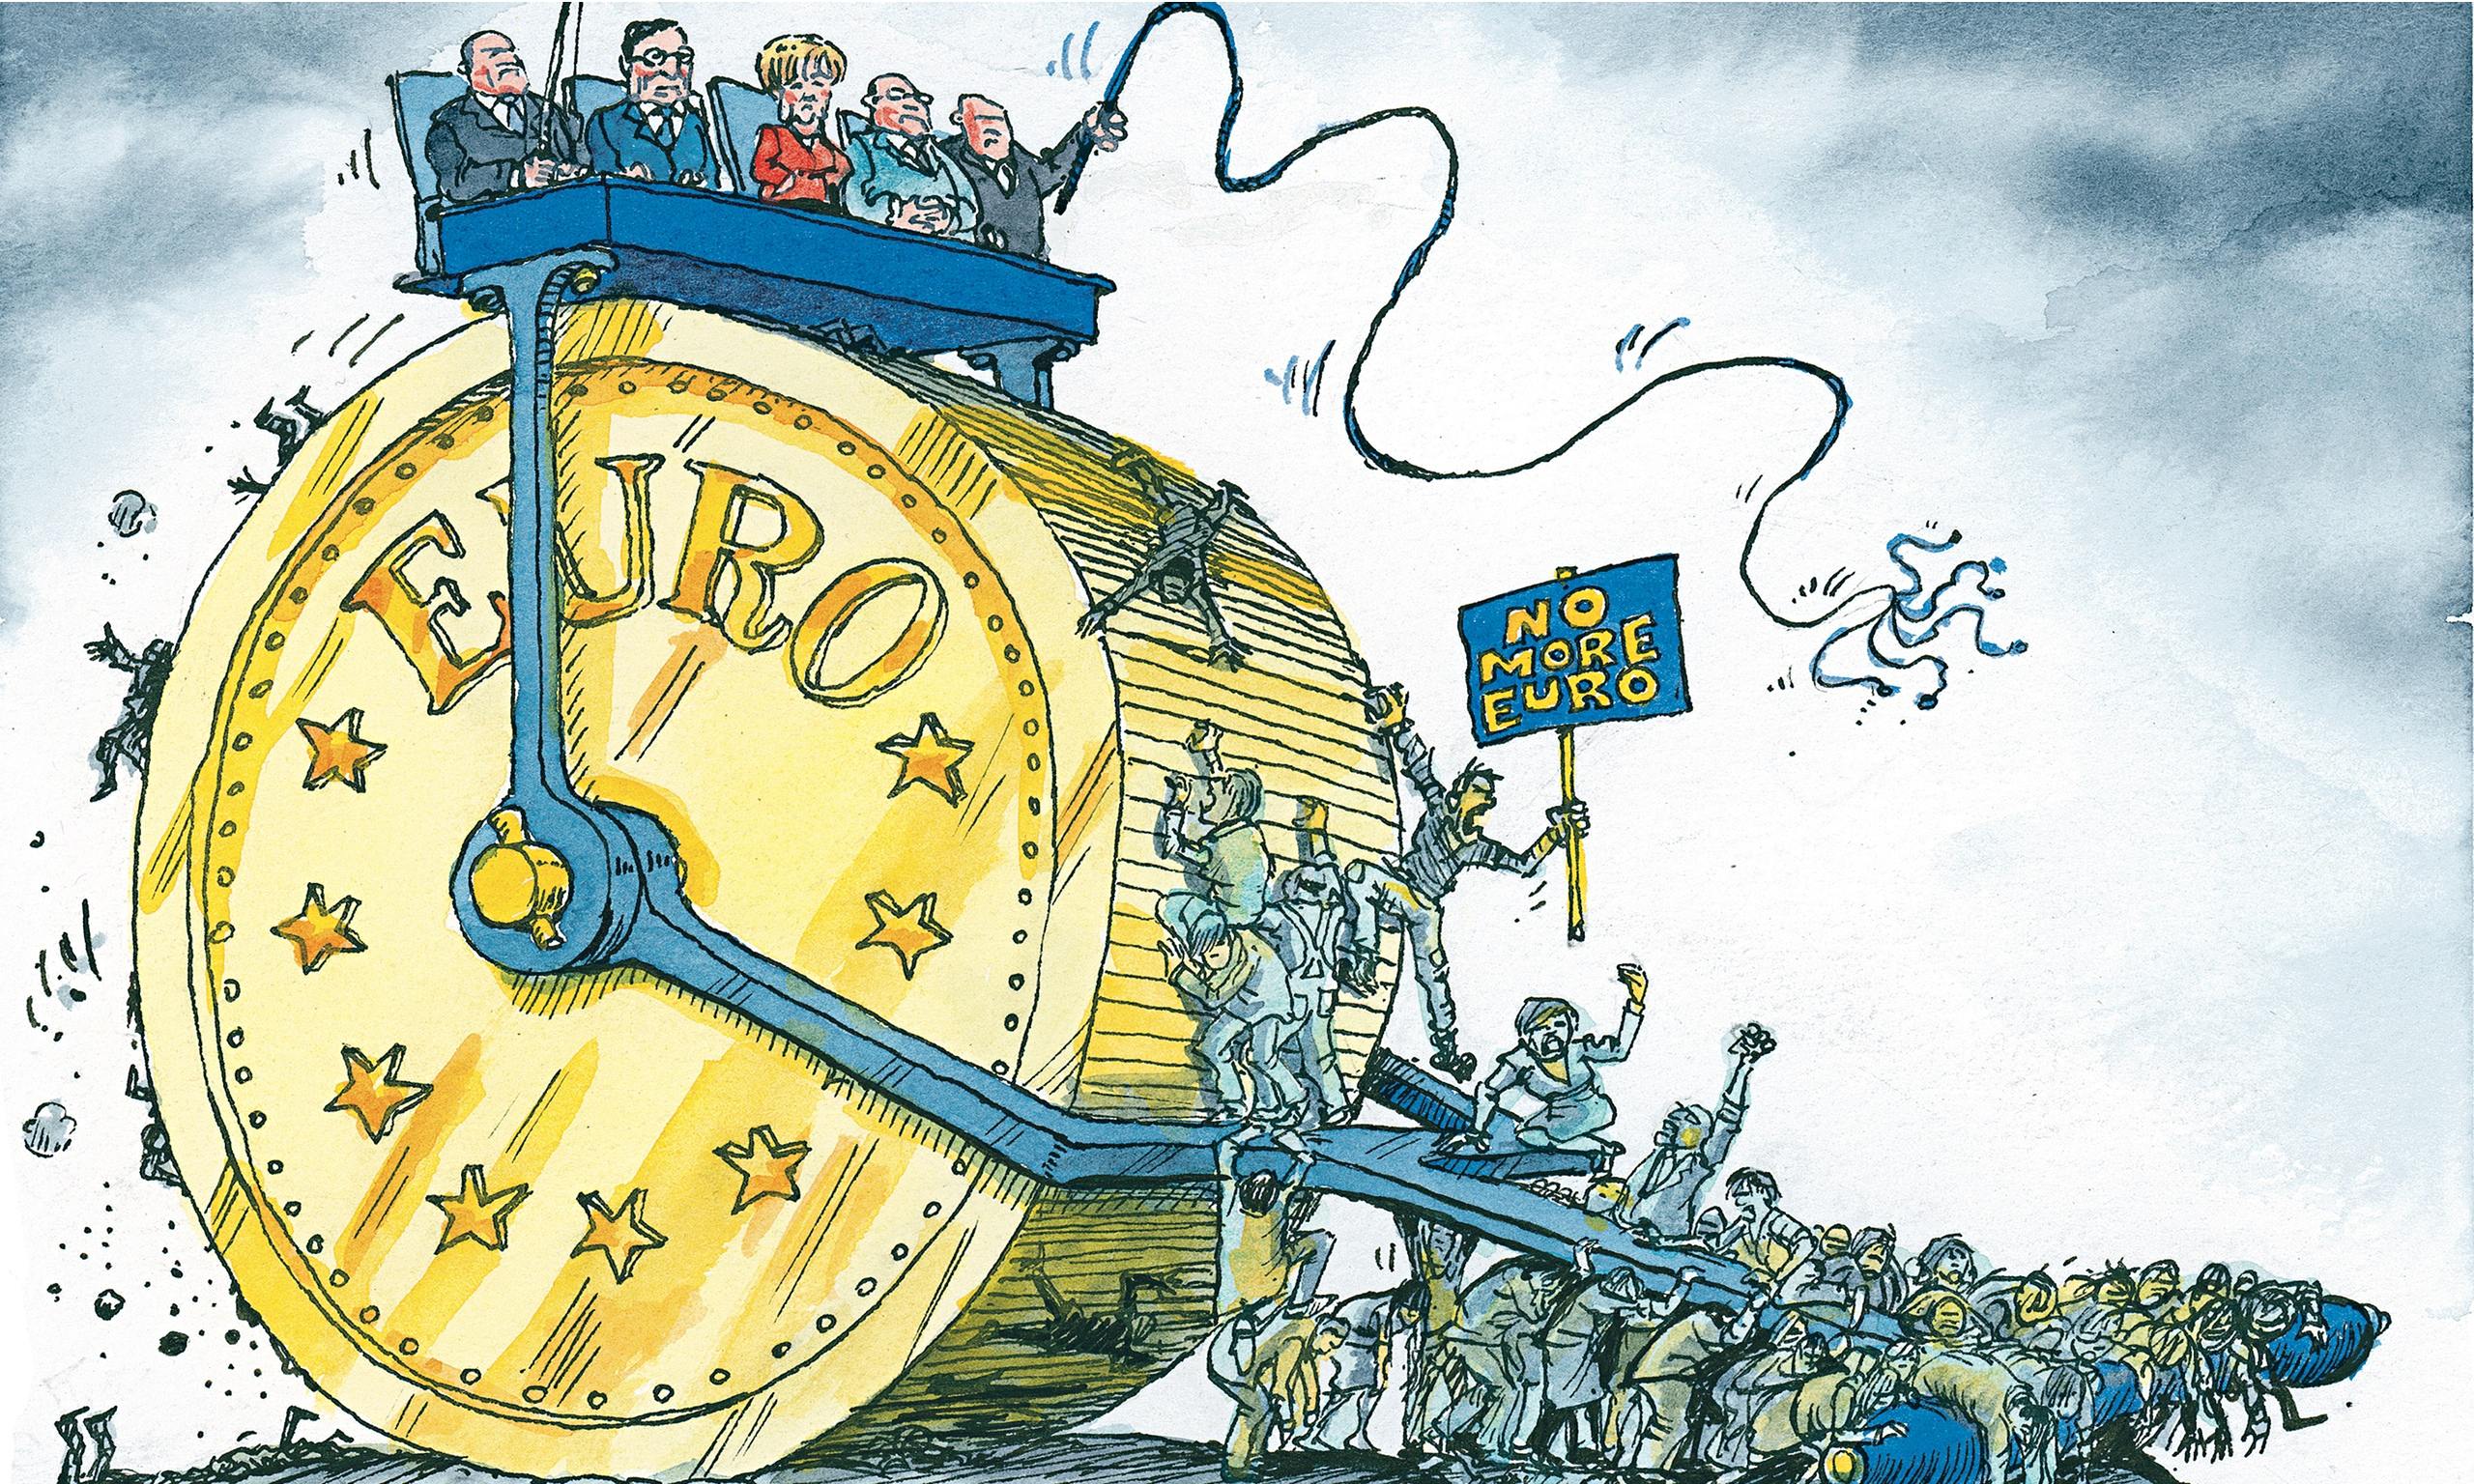 http://static.guim.co.uk/sys-images/Guardian/Pix/pictures/2014/10/18/1413623344123/Cartoon-by-David-Simonds.-014.jpg